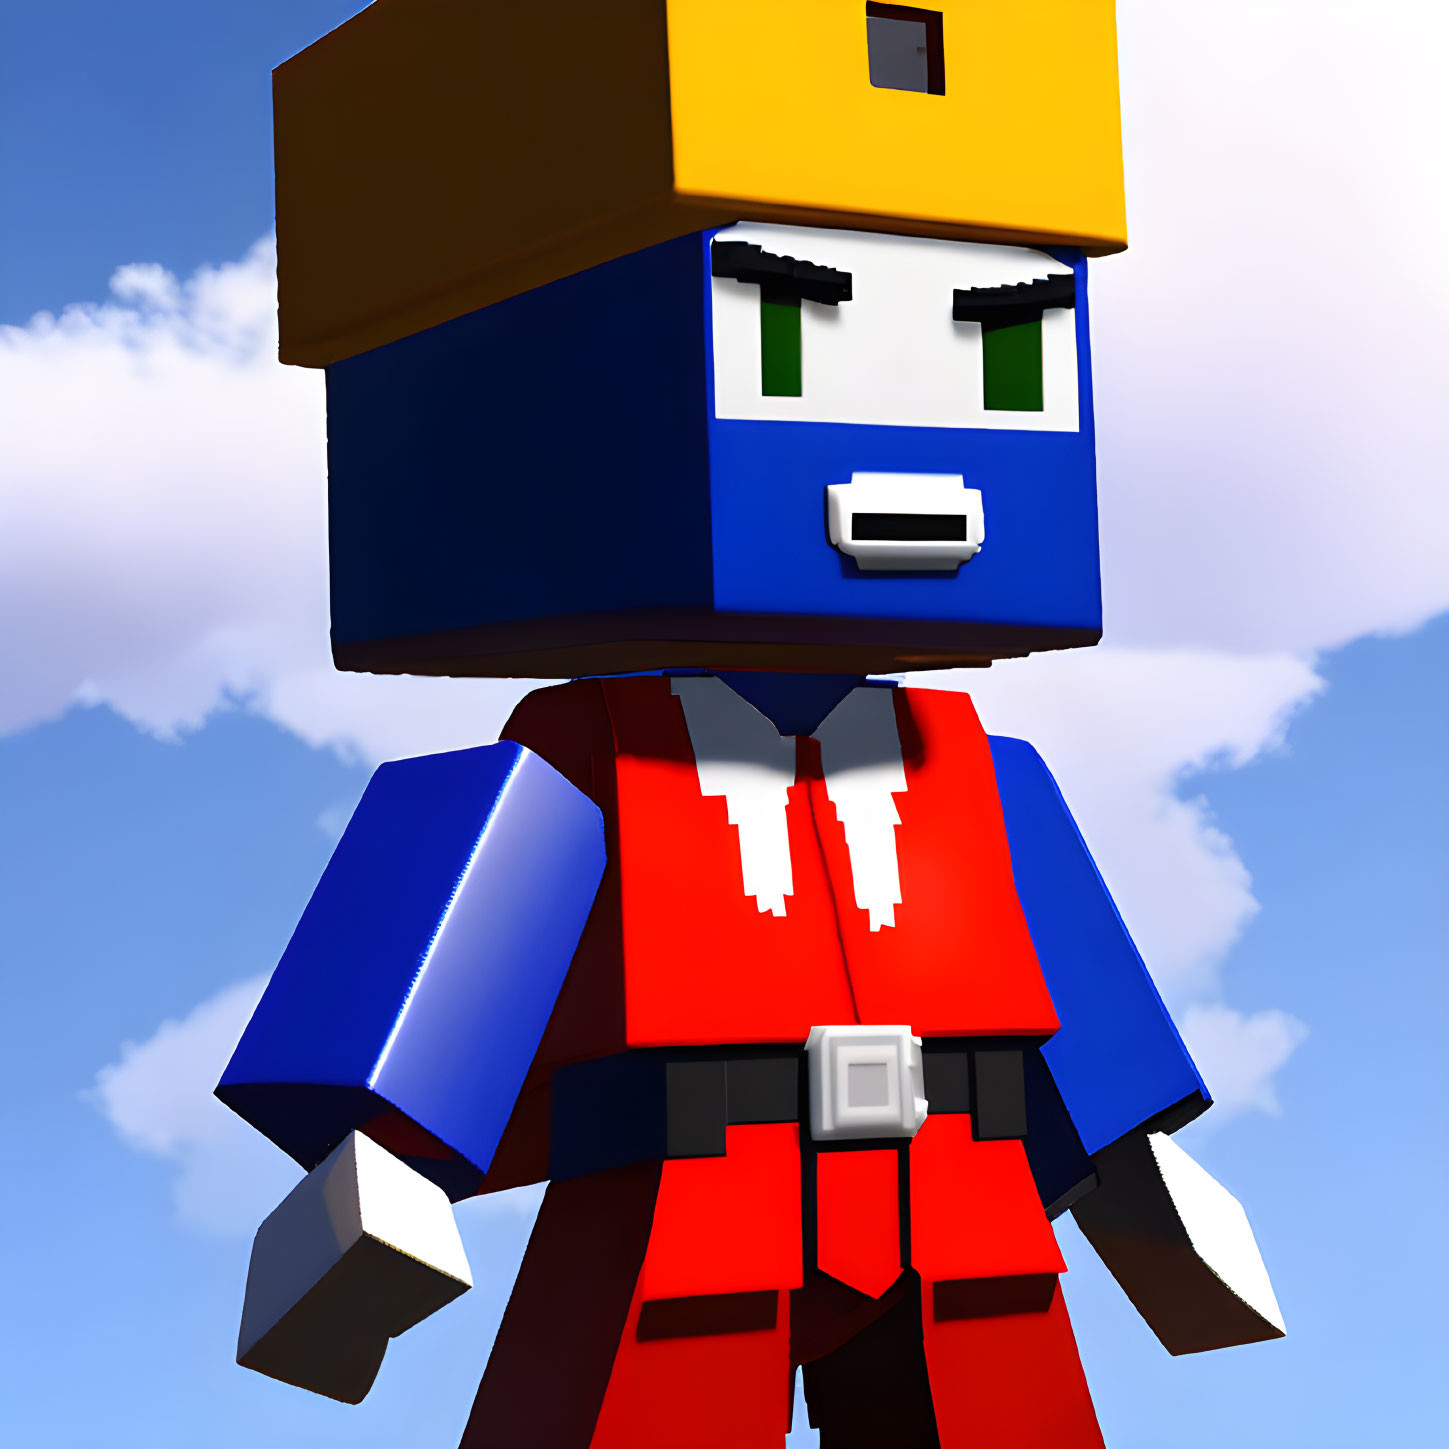 Blocky Stylized Character in Blue Cap and Red Jacket on Cloudy Sky